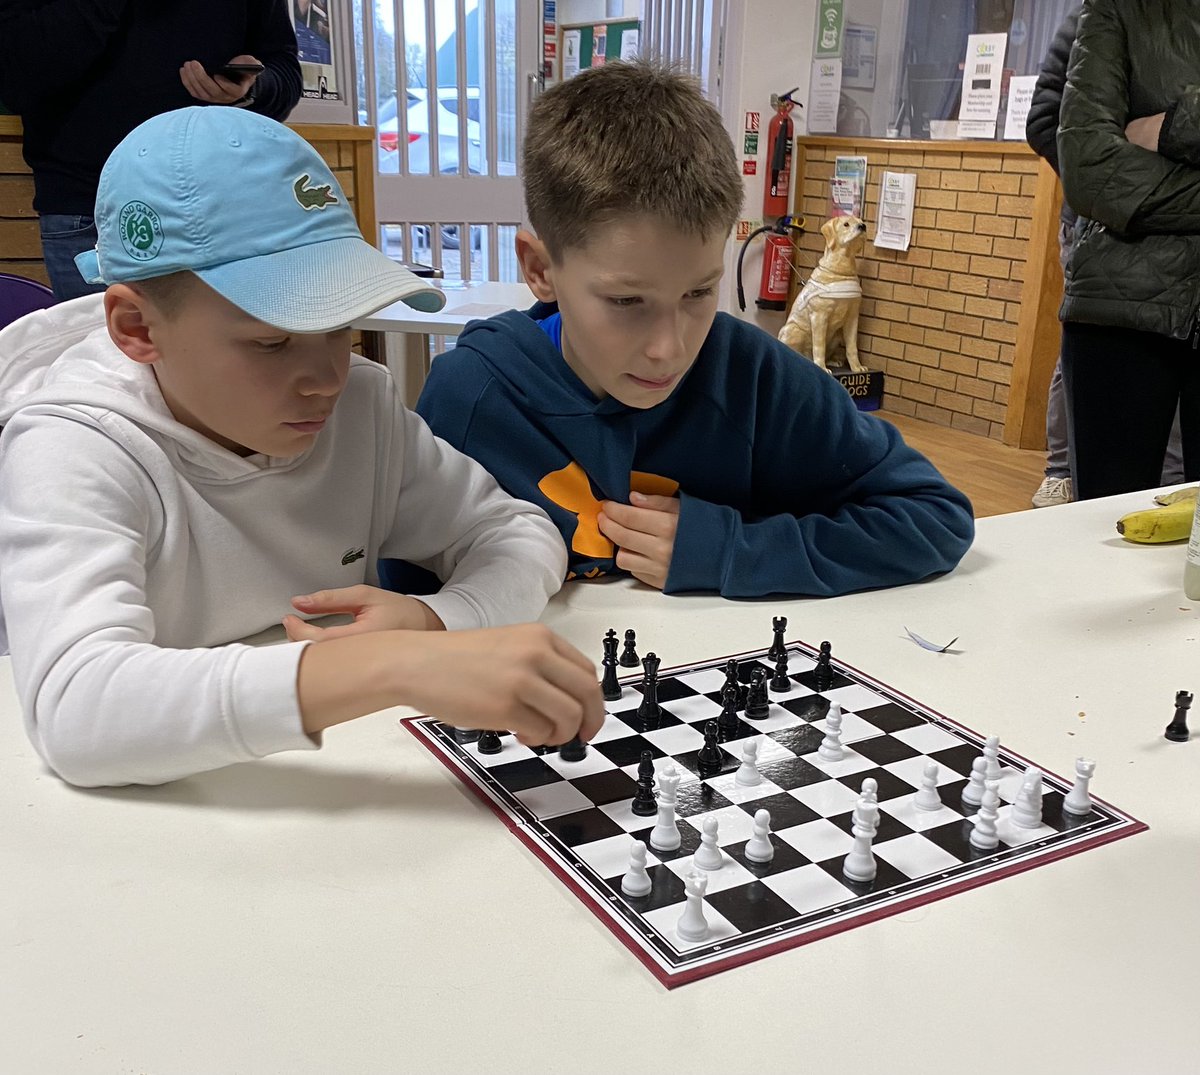 Life as a @MPS_Sport @MillfieldPrep @millfieldtennis #tennisplayer away competing at #national tournaments means lots of waiting. School/squad mate Zach and I using our brains ! #chess #decisionmaking #alwayslearning #millfieldway @Chapman_Tennis @SomersetLTA @HantsIOWTennis